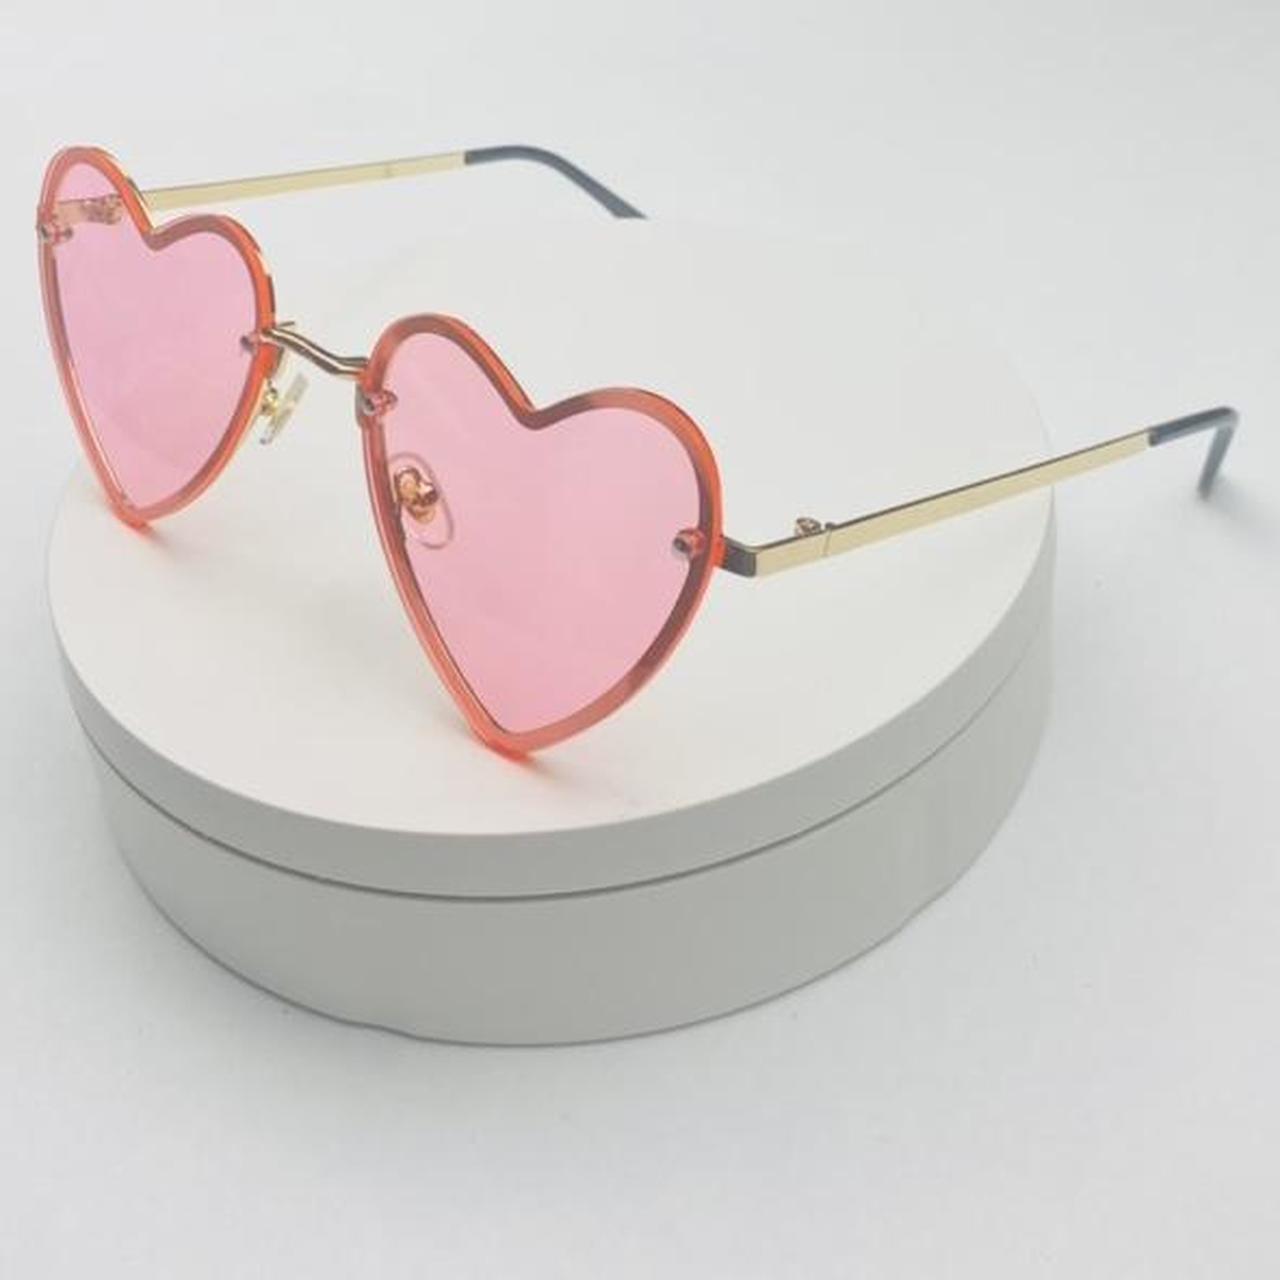 Rimless Pink Metal Heart Shaped Sunglasses With Pink Depop